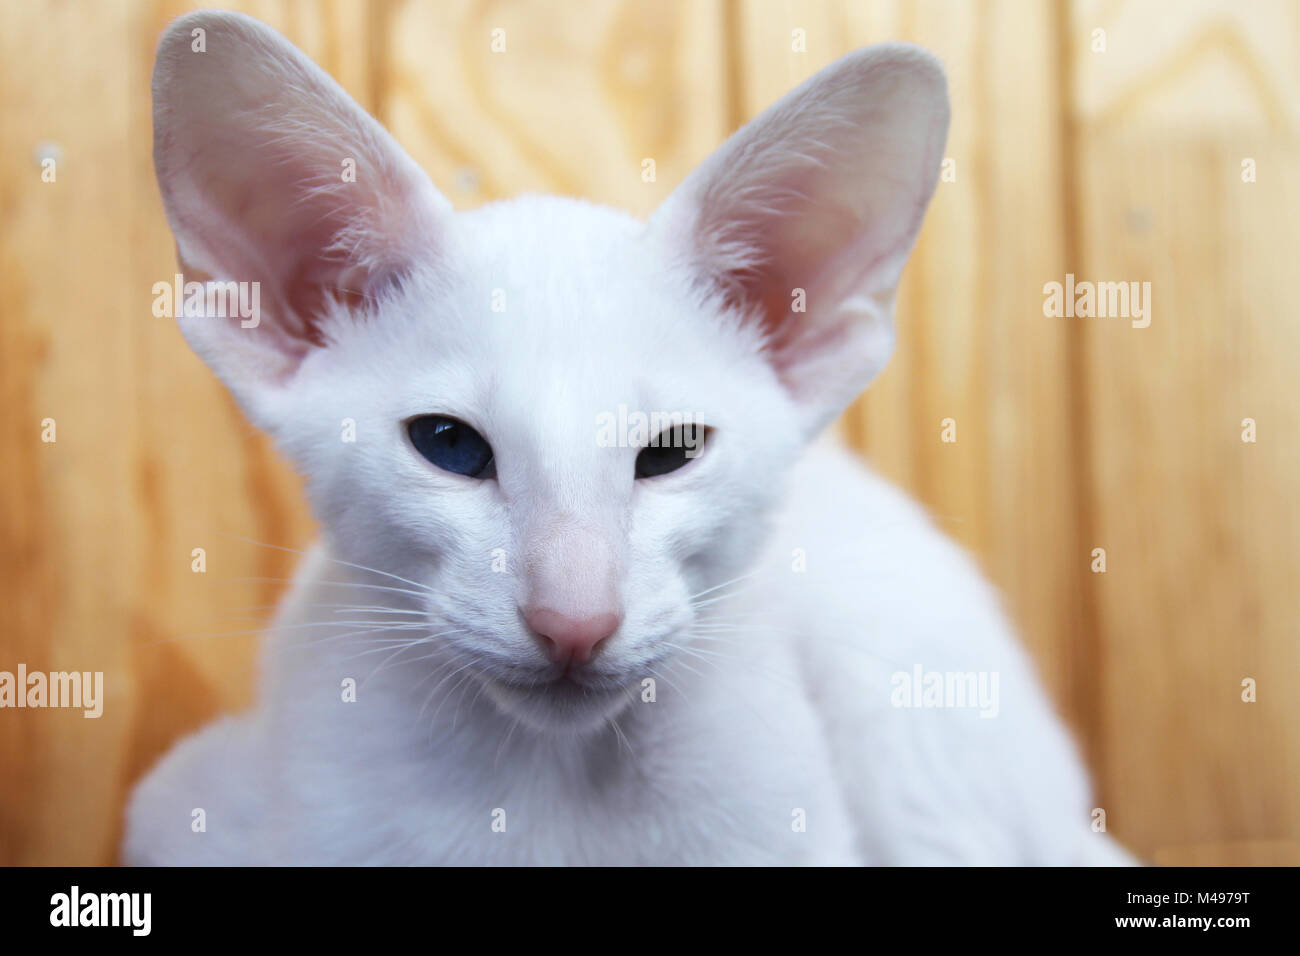 White oriental cat with eyes of different colors Stock Photo